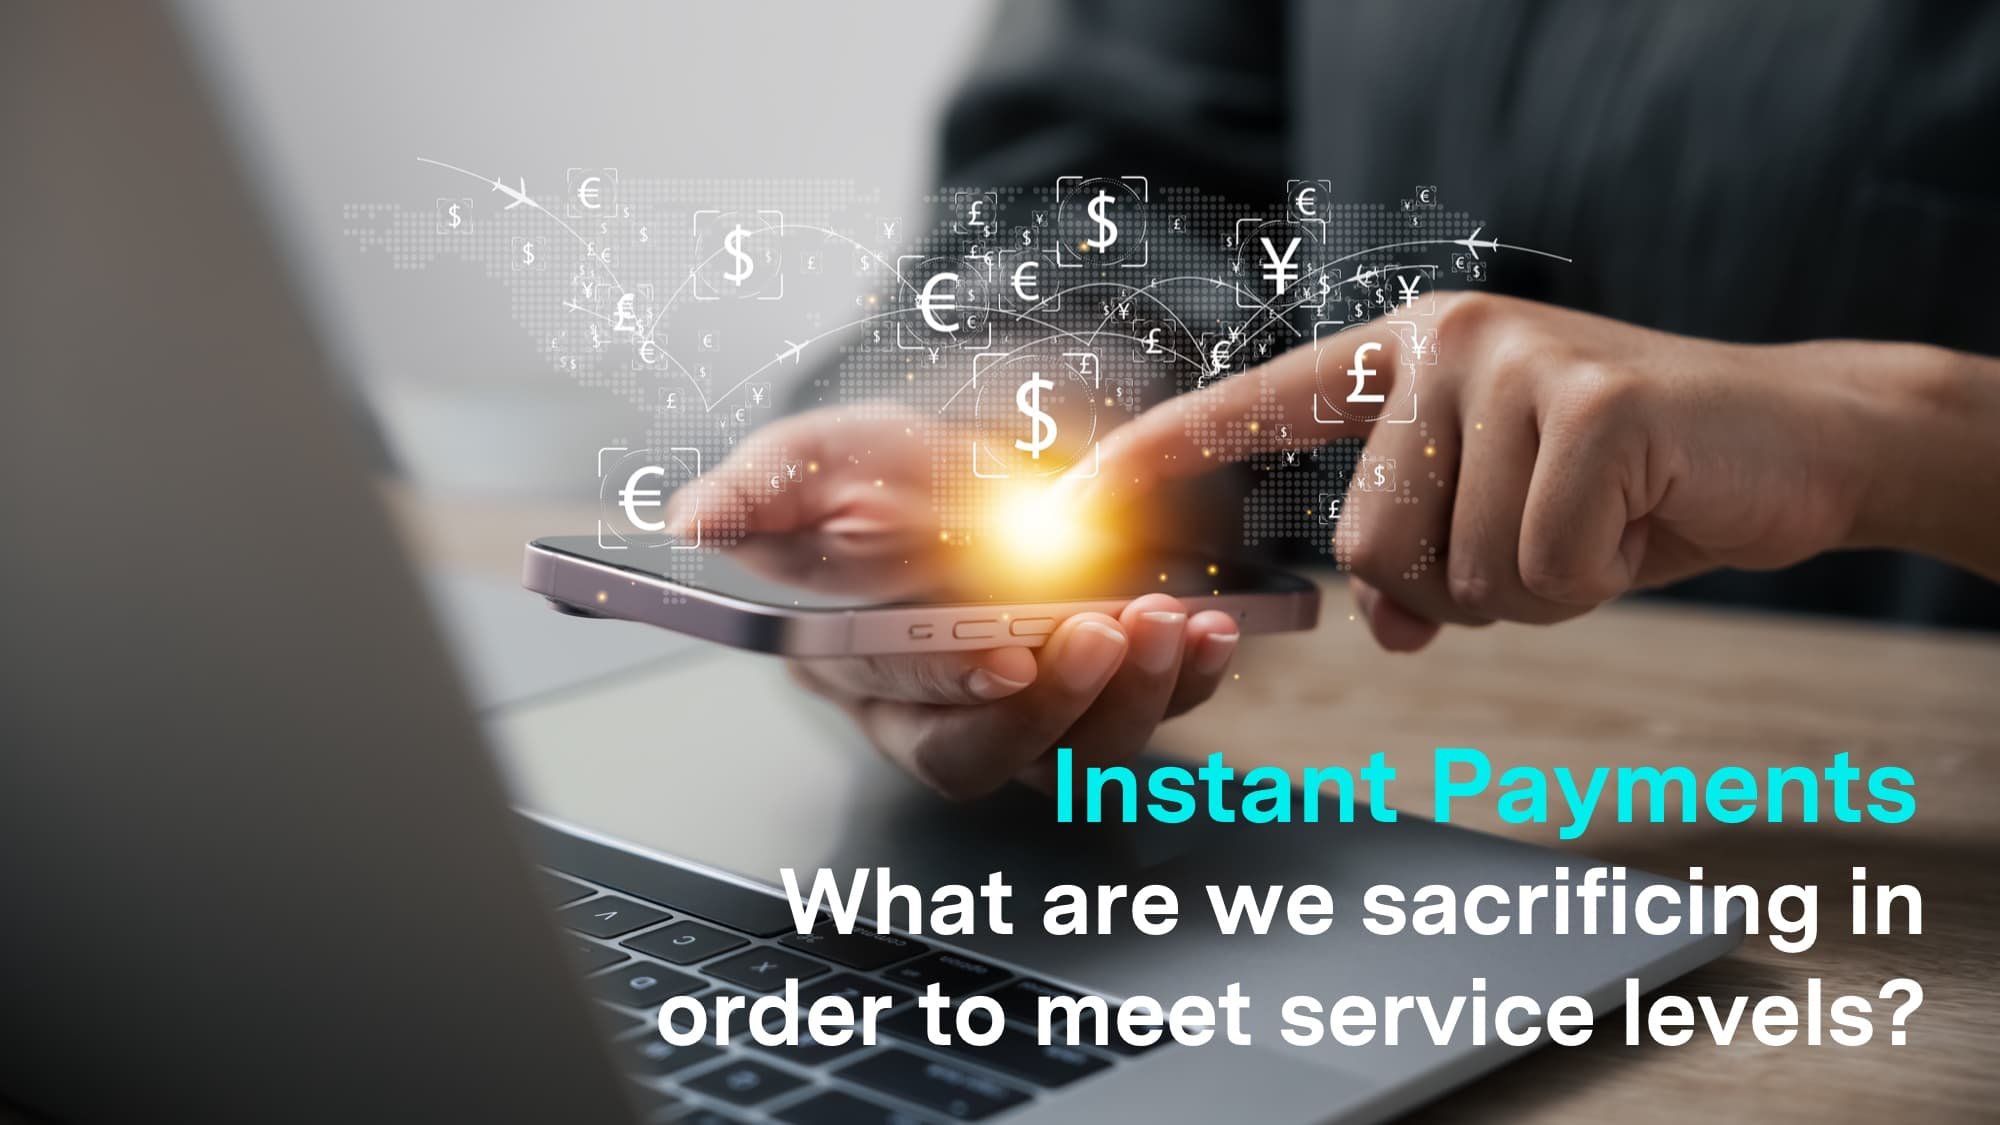 Instant Payments – what are we sacrificing in order to meet service levels?